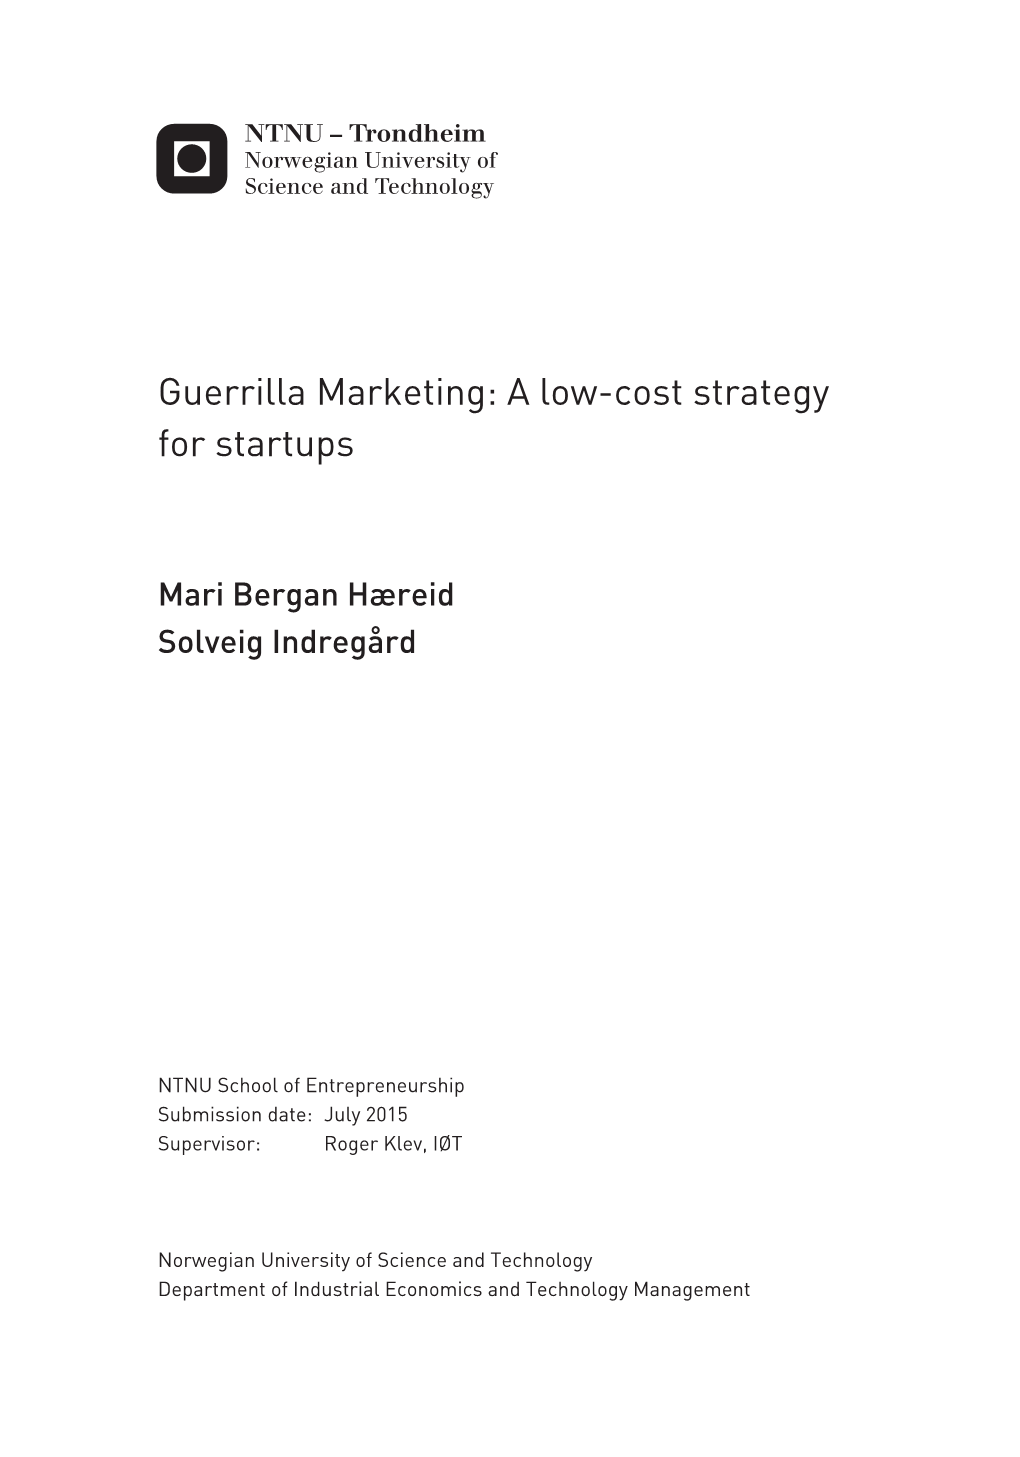 Guerrilla Marketing: a Low-Cost Strategy for Startups